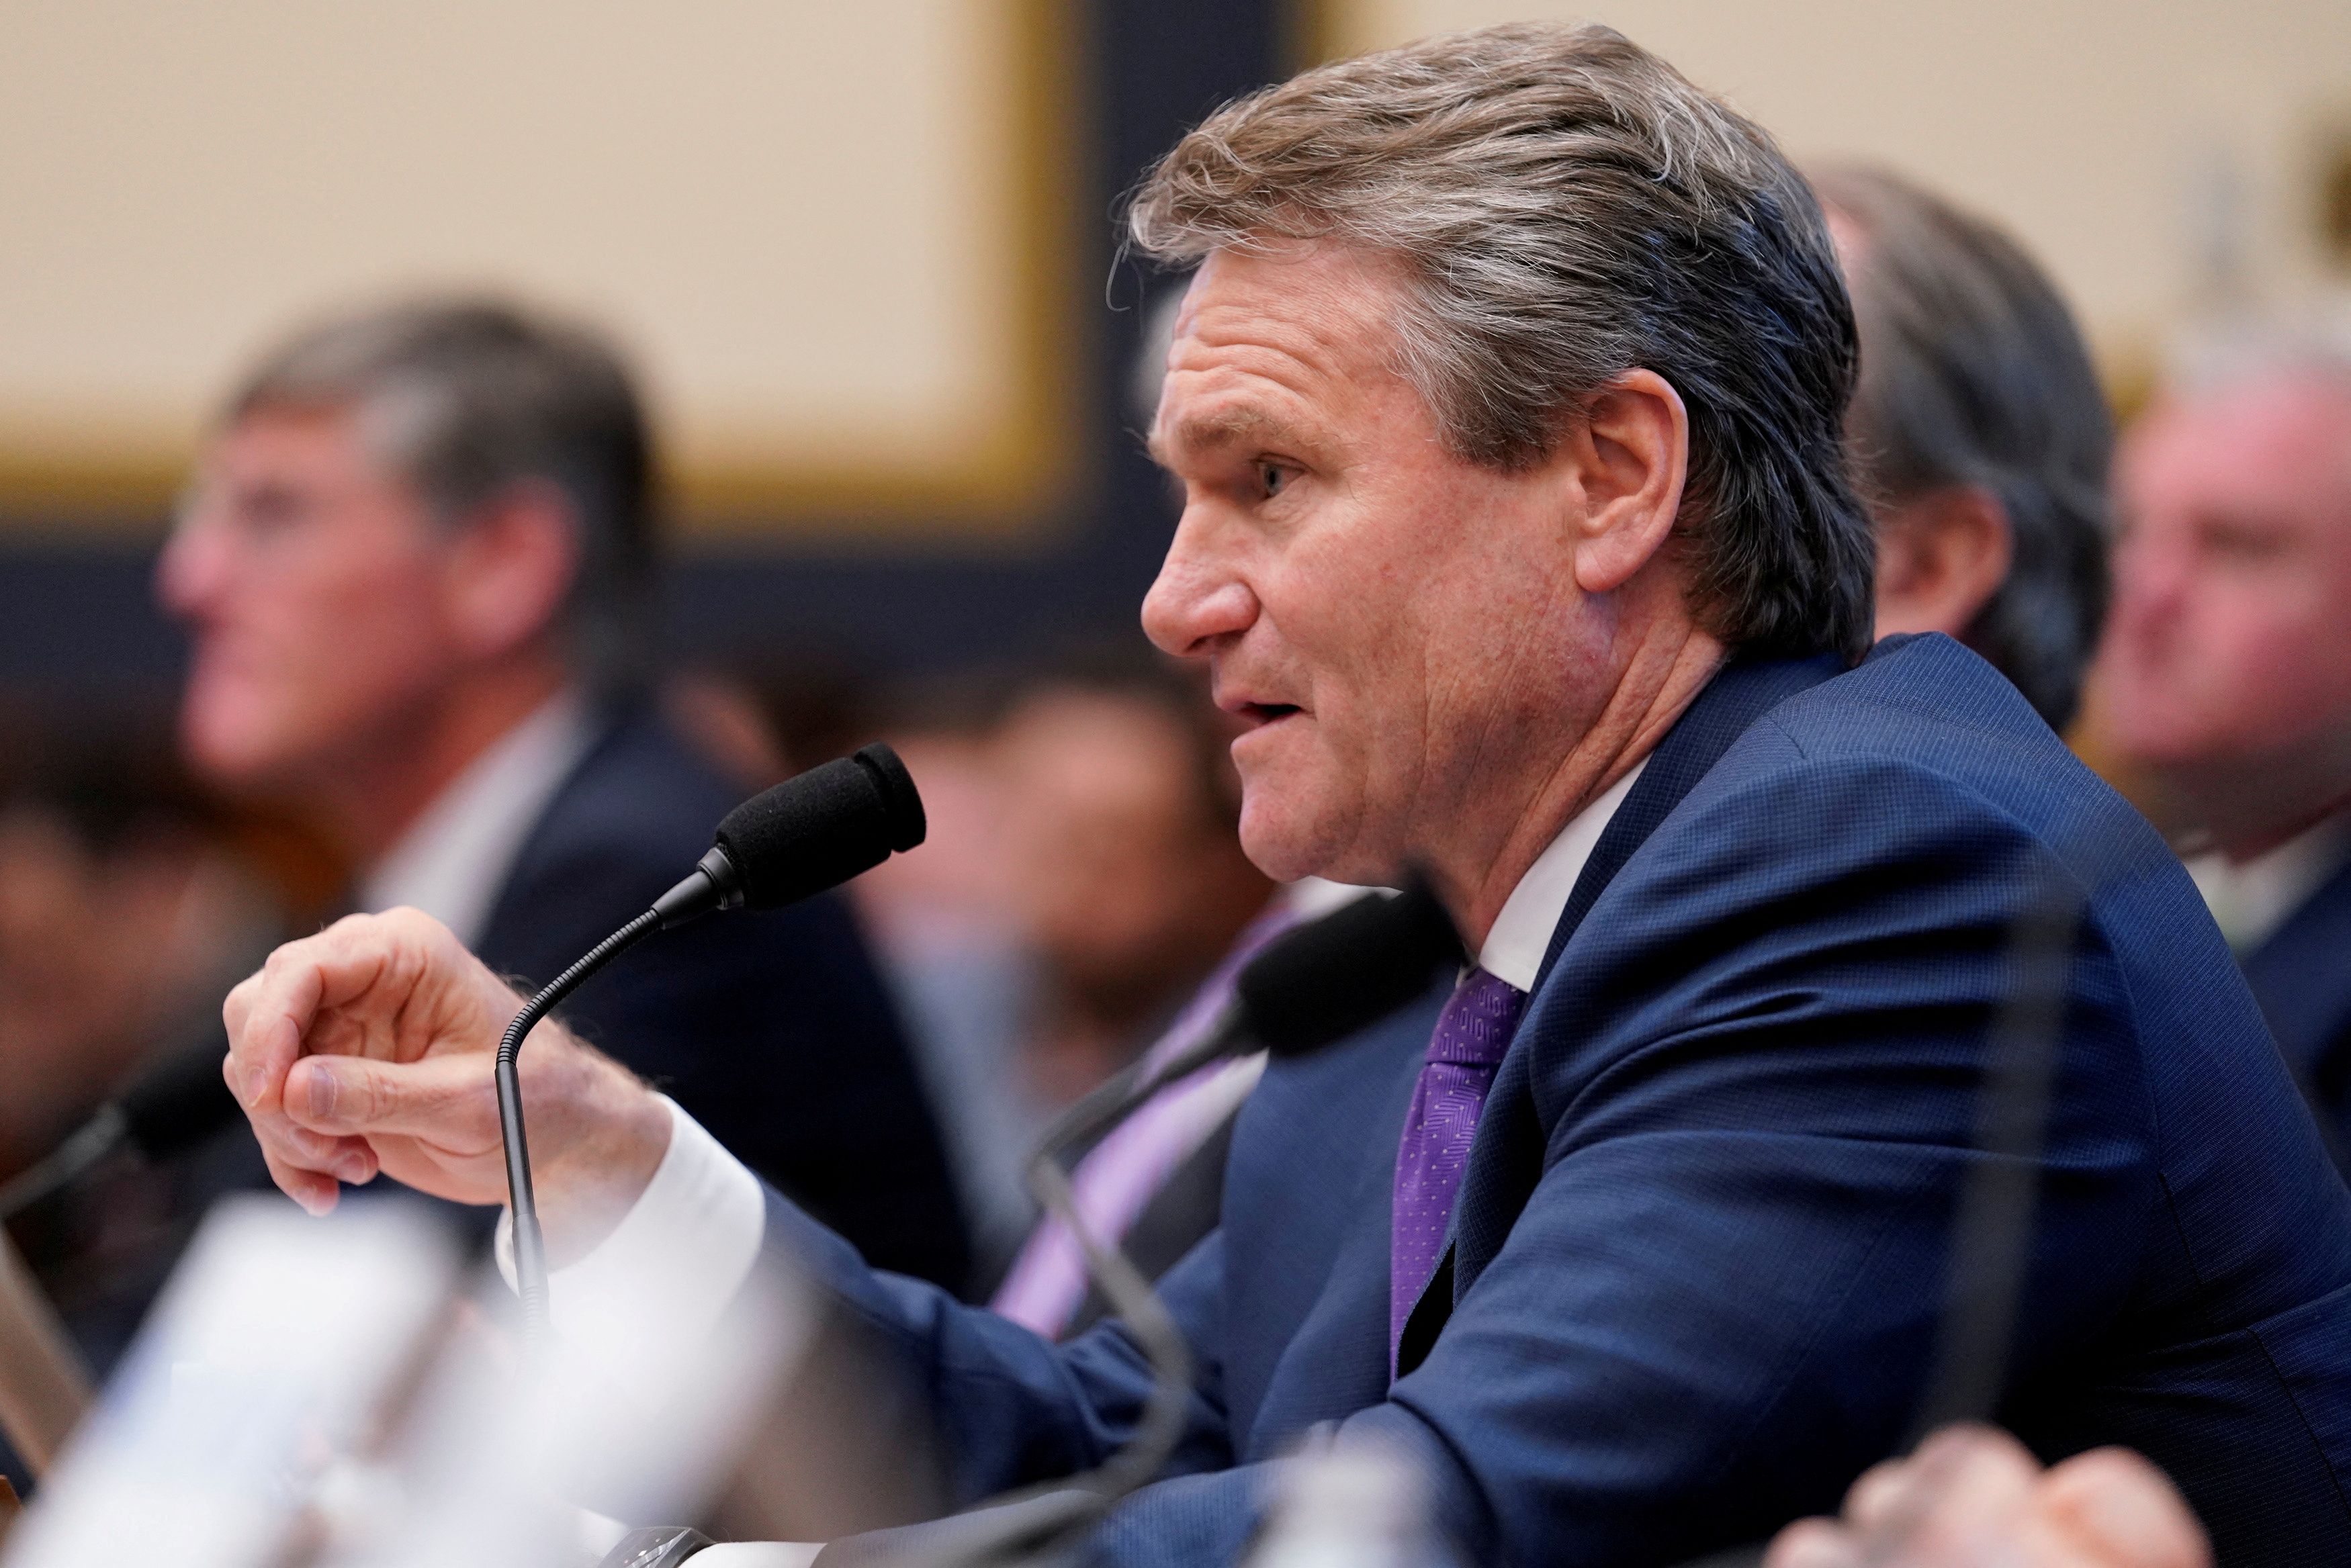 Brian T. Moynihan, chairman & CEO of Bank of America, testifies before a House Financial Services Committee hearing on Capitol Hill in Washington